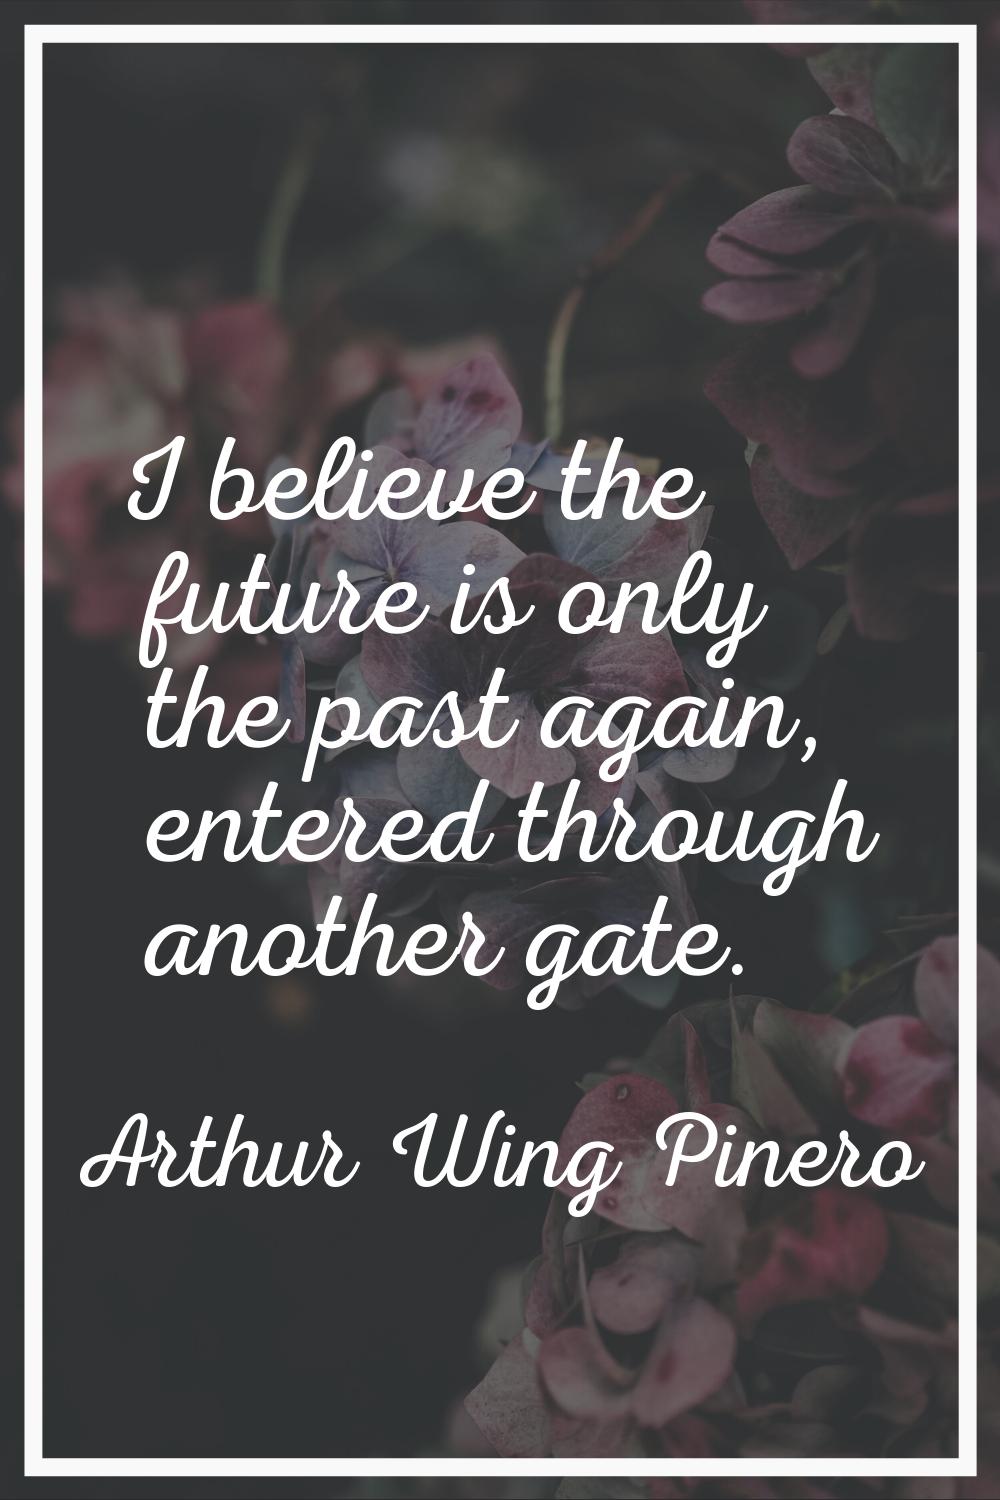 I believe the future is only the past again, entered through another gate.